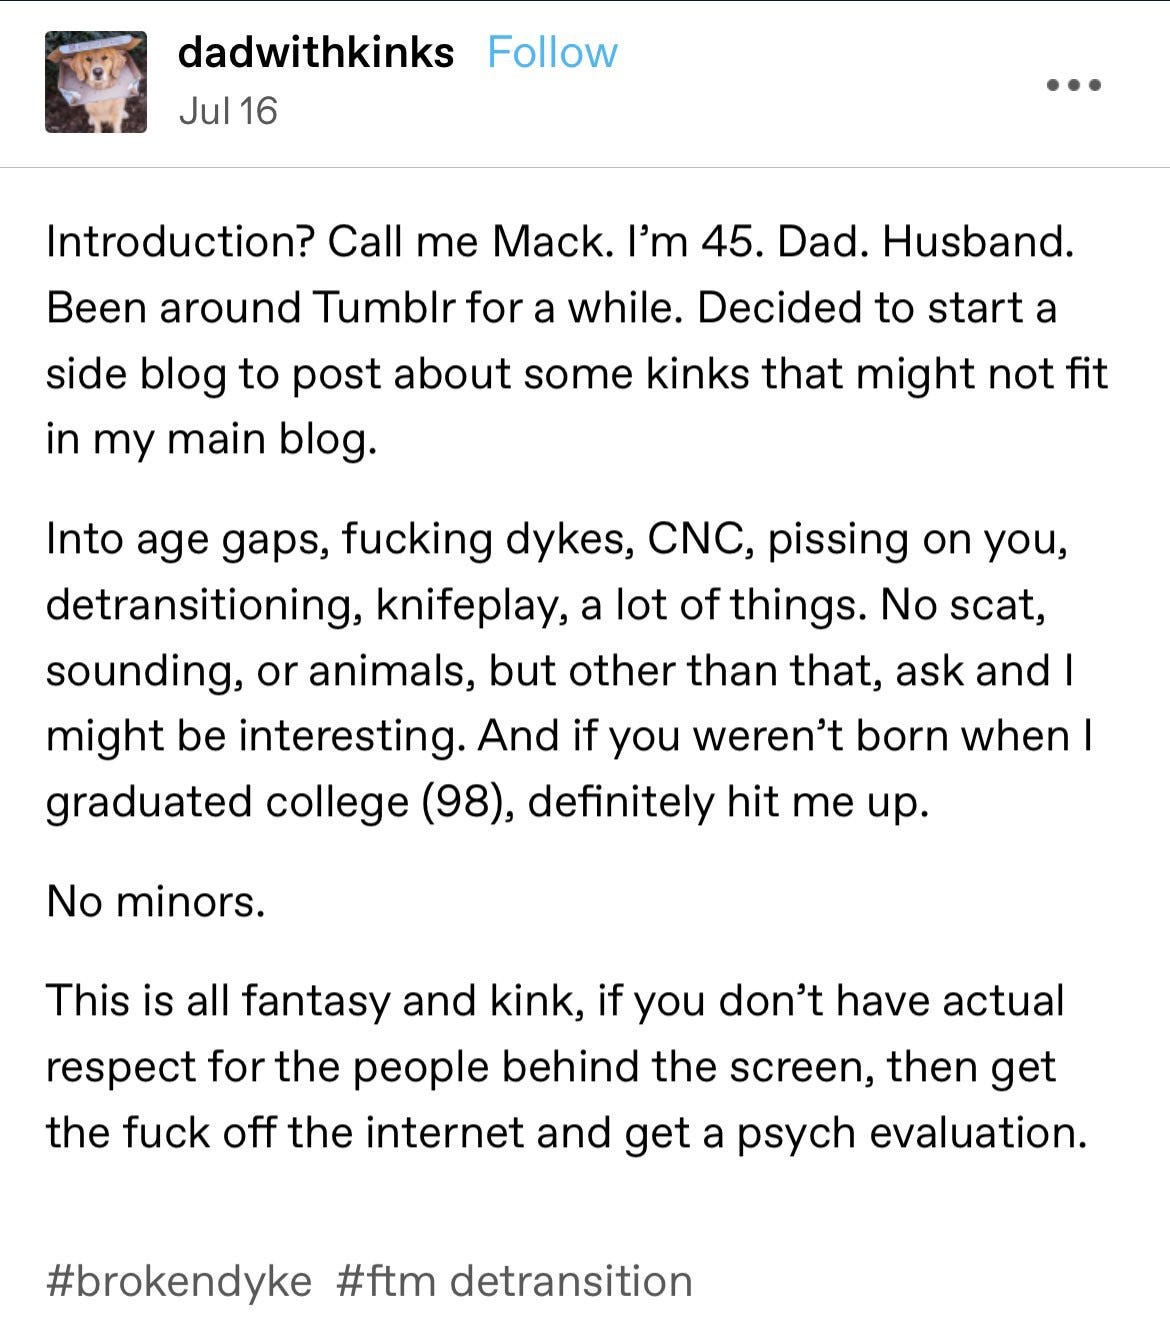 Tumblr users are now sharing 'detransitioner kink'